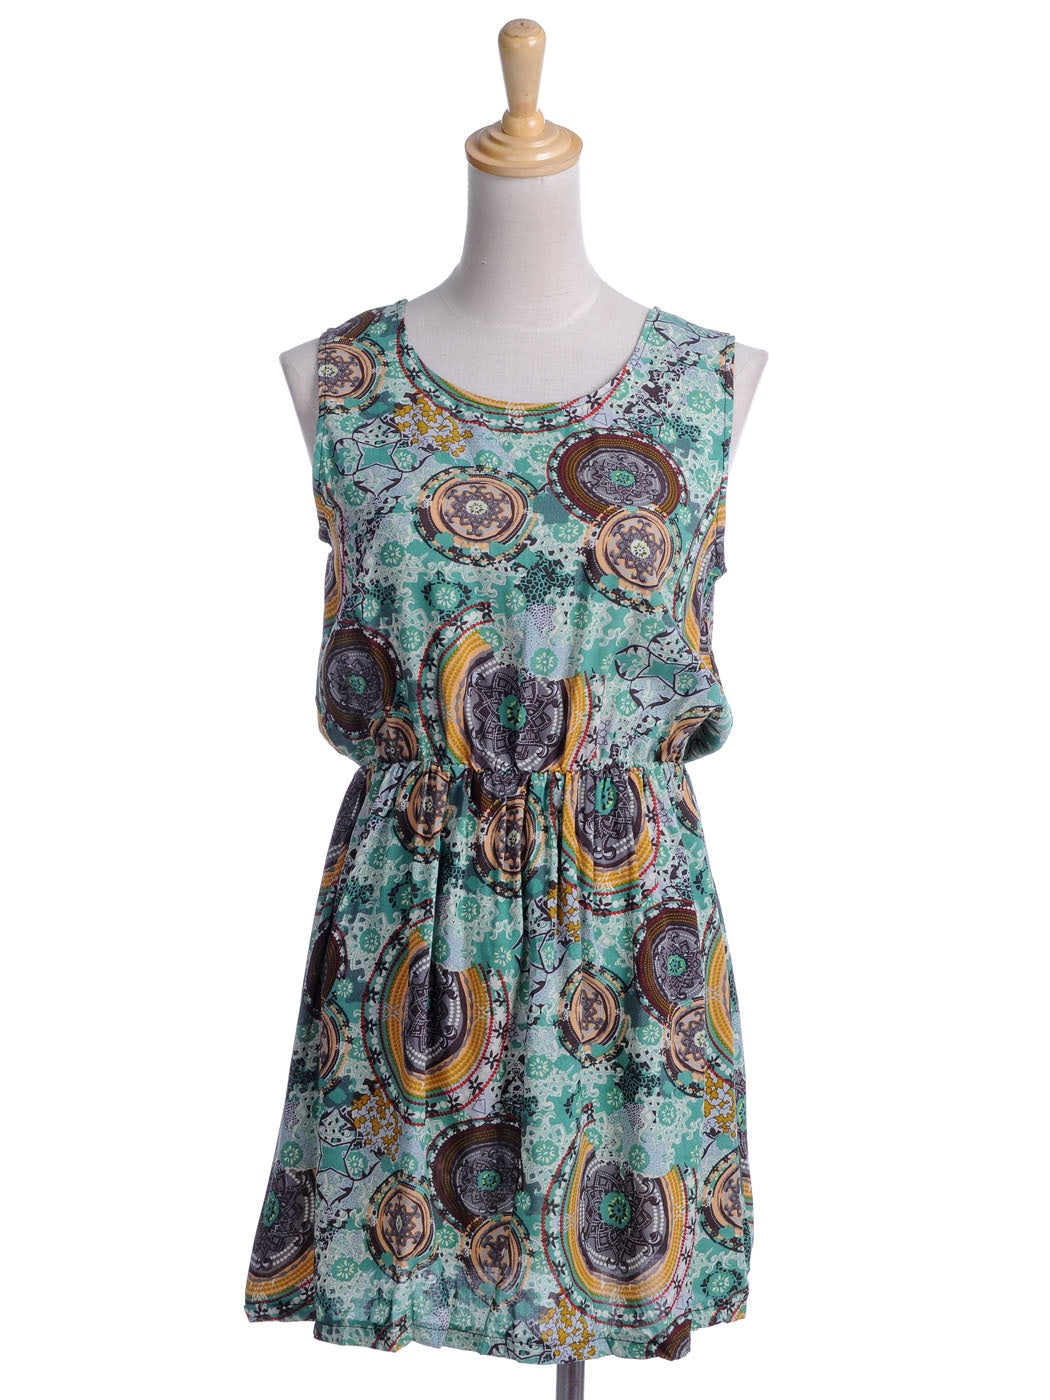 S/M Fit Multicoloured All Over Spiritual New Age Inspired Print Dress